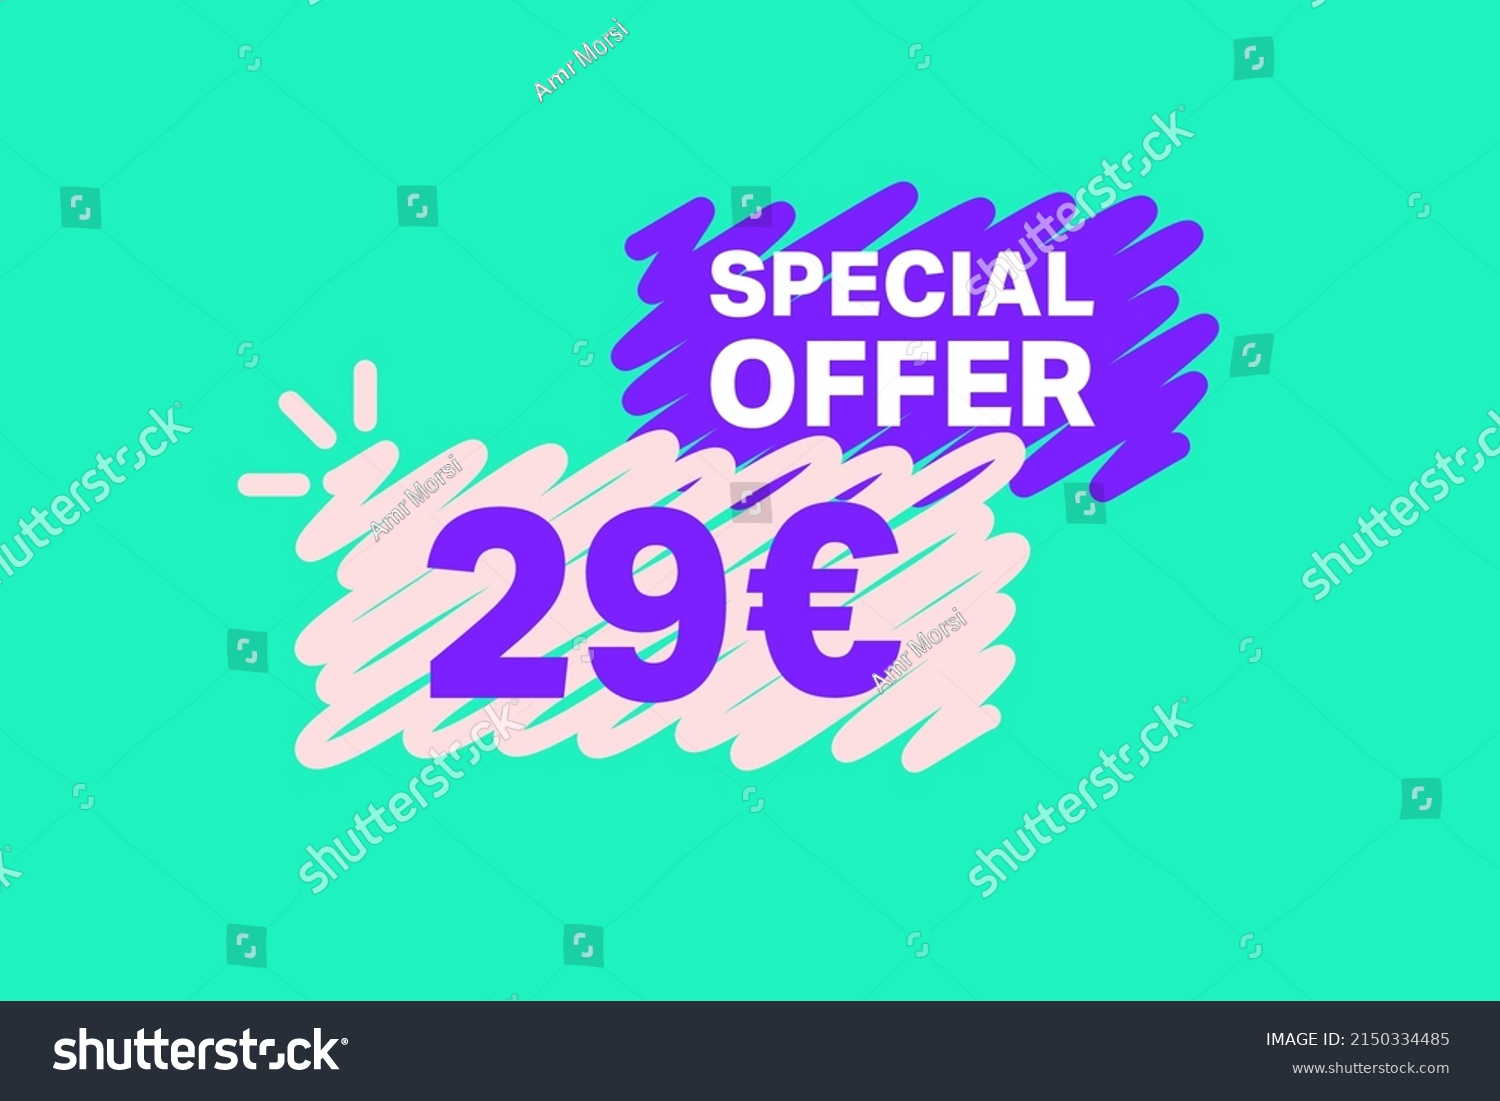 SVG of 29 Euro OFF Sale Discount banner shape template. Super Sale Euro 29 Special offer badge end of the season sale coupon bubble icon. Modern concept design. Discount offer price tag vector illustration. svg